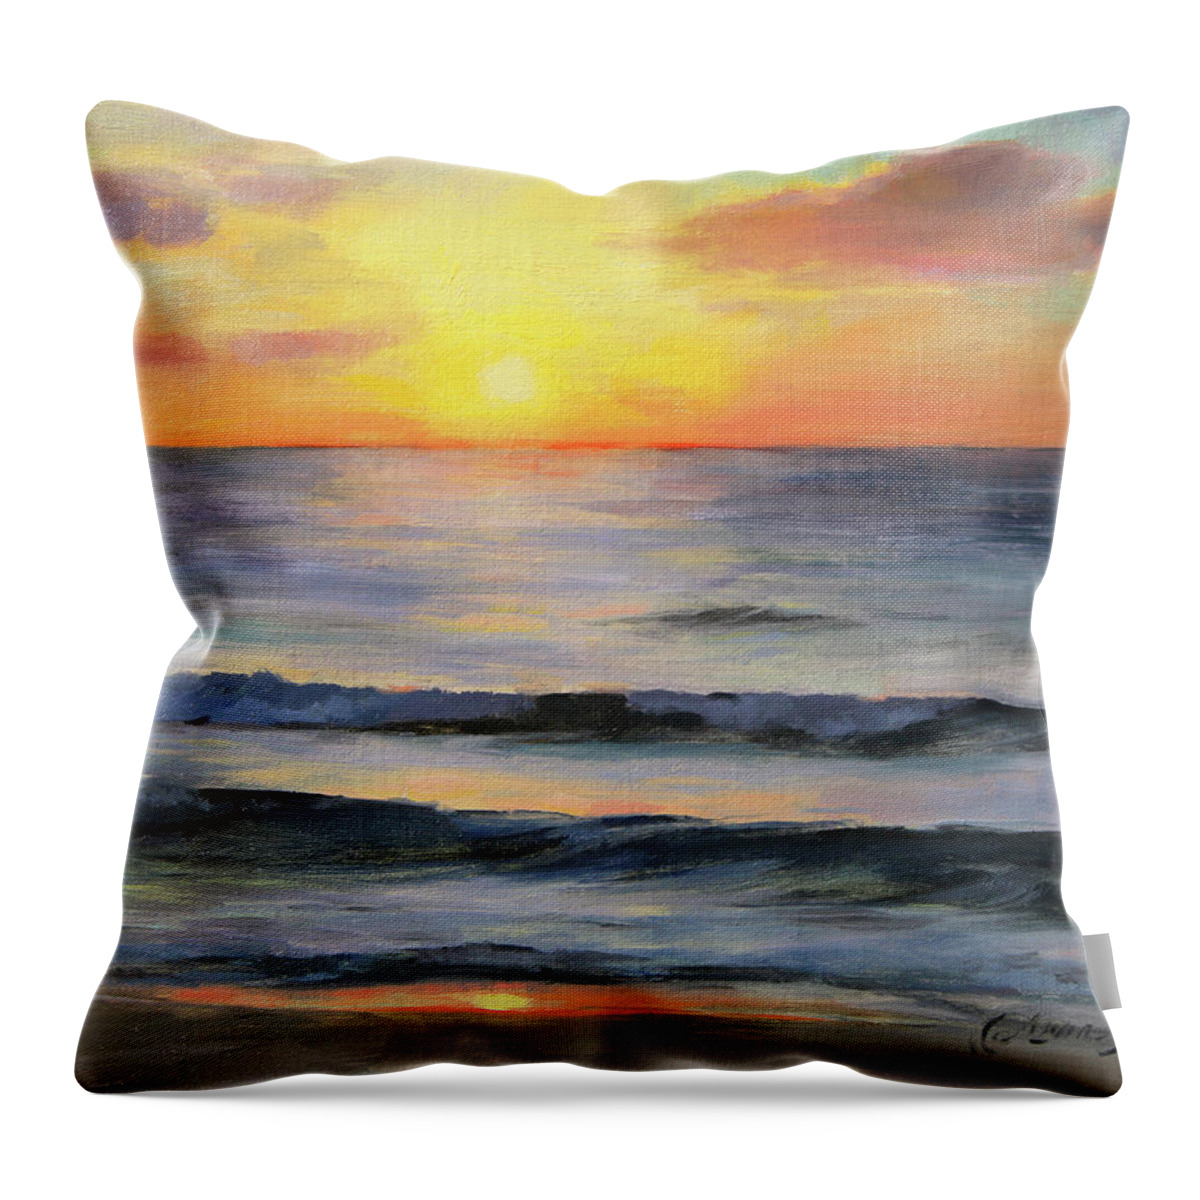 Riviera Maya Throw Pillow featuring the painting Riviera Sunrise by Anna Rose Bain